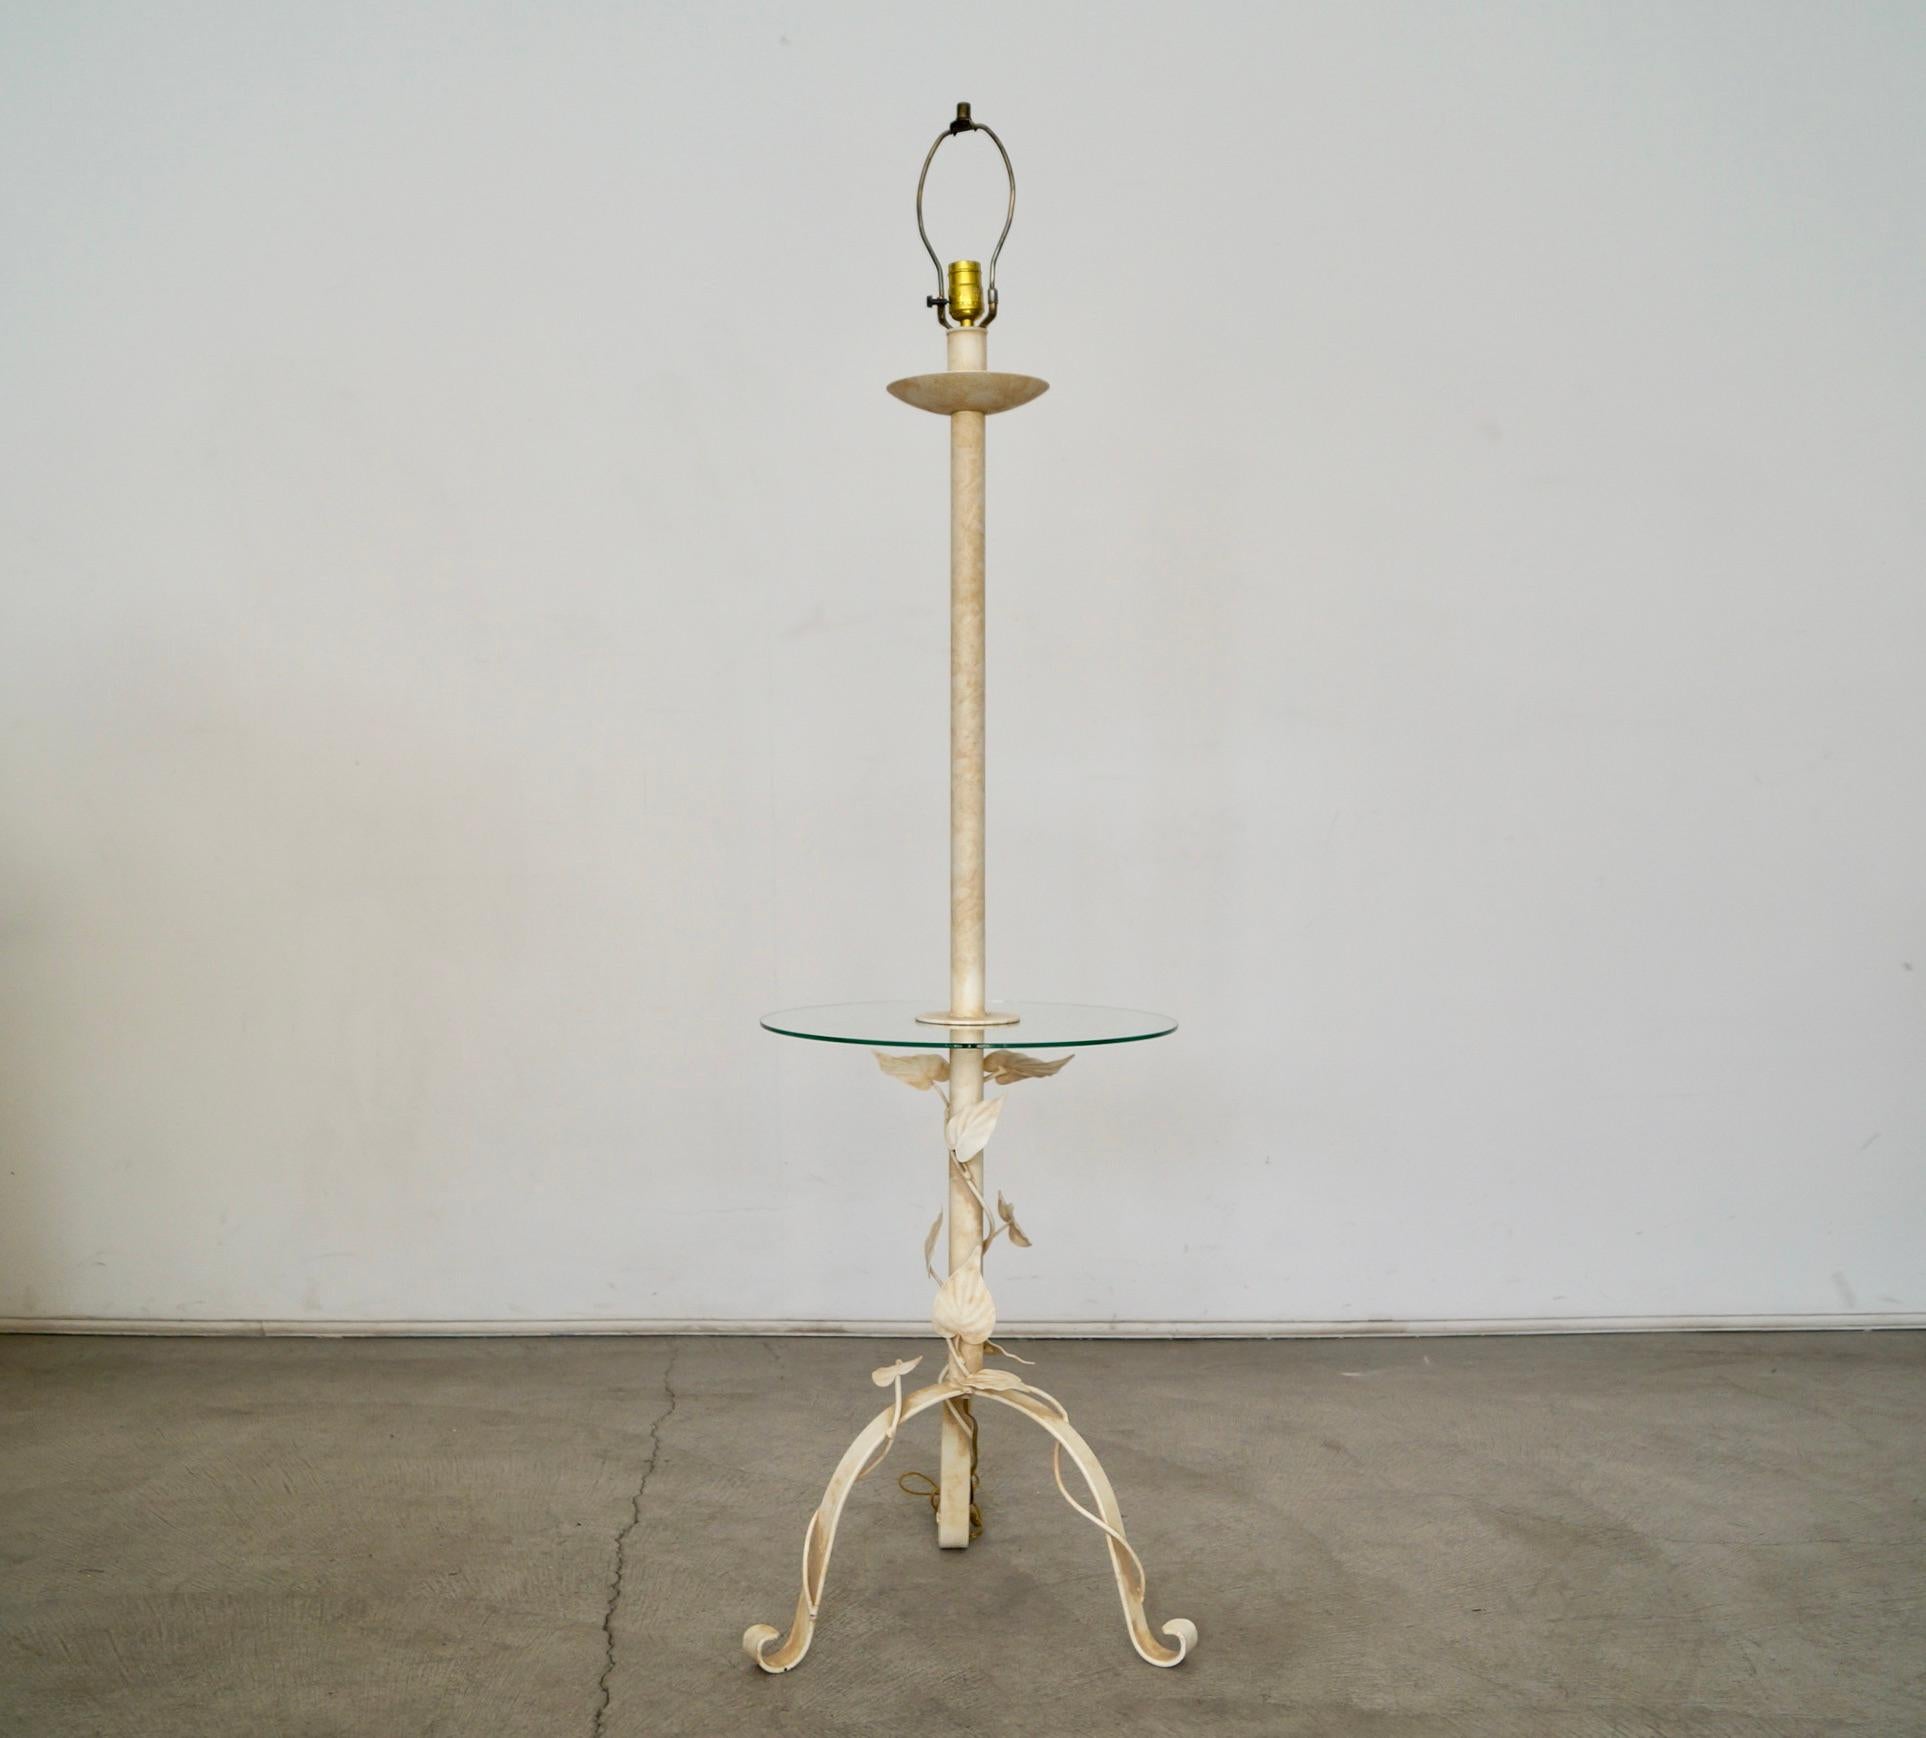 1970's Hollywood Regency Sculptural Metal & Glass Side Table Floor Lamp In Good Condition For Sale In Burbank, CA